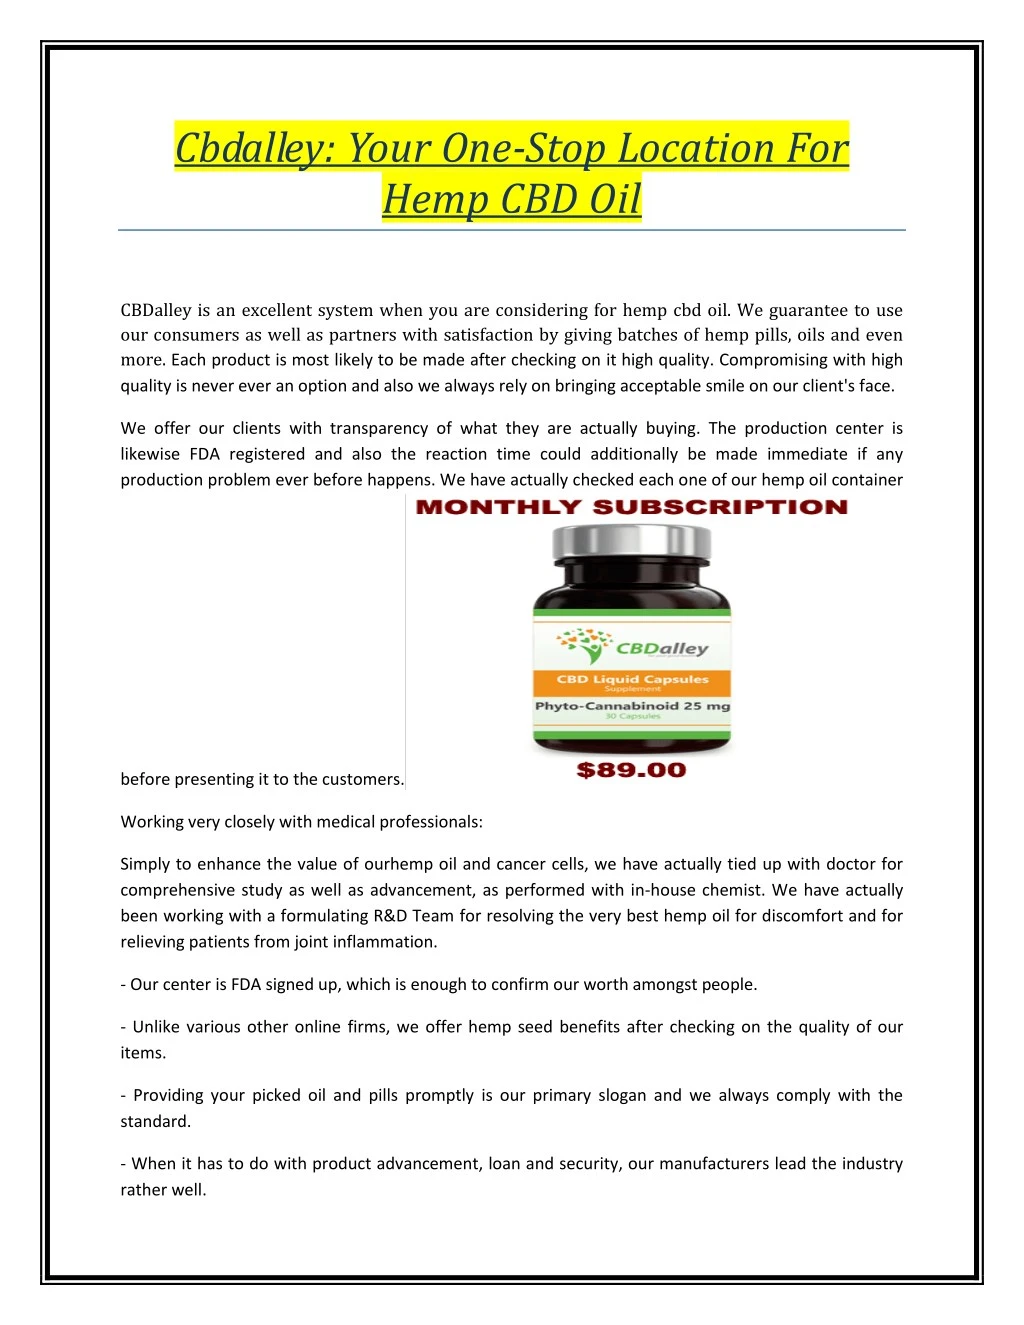 cbdalley your one stop location for hemp cbd oil